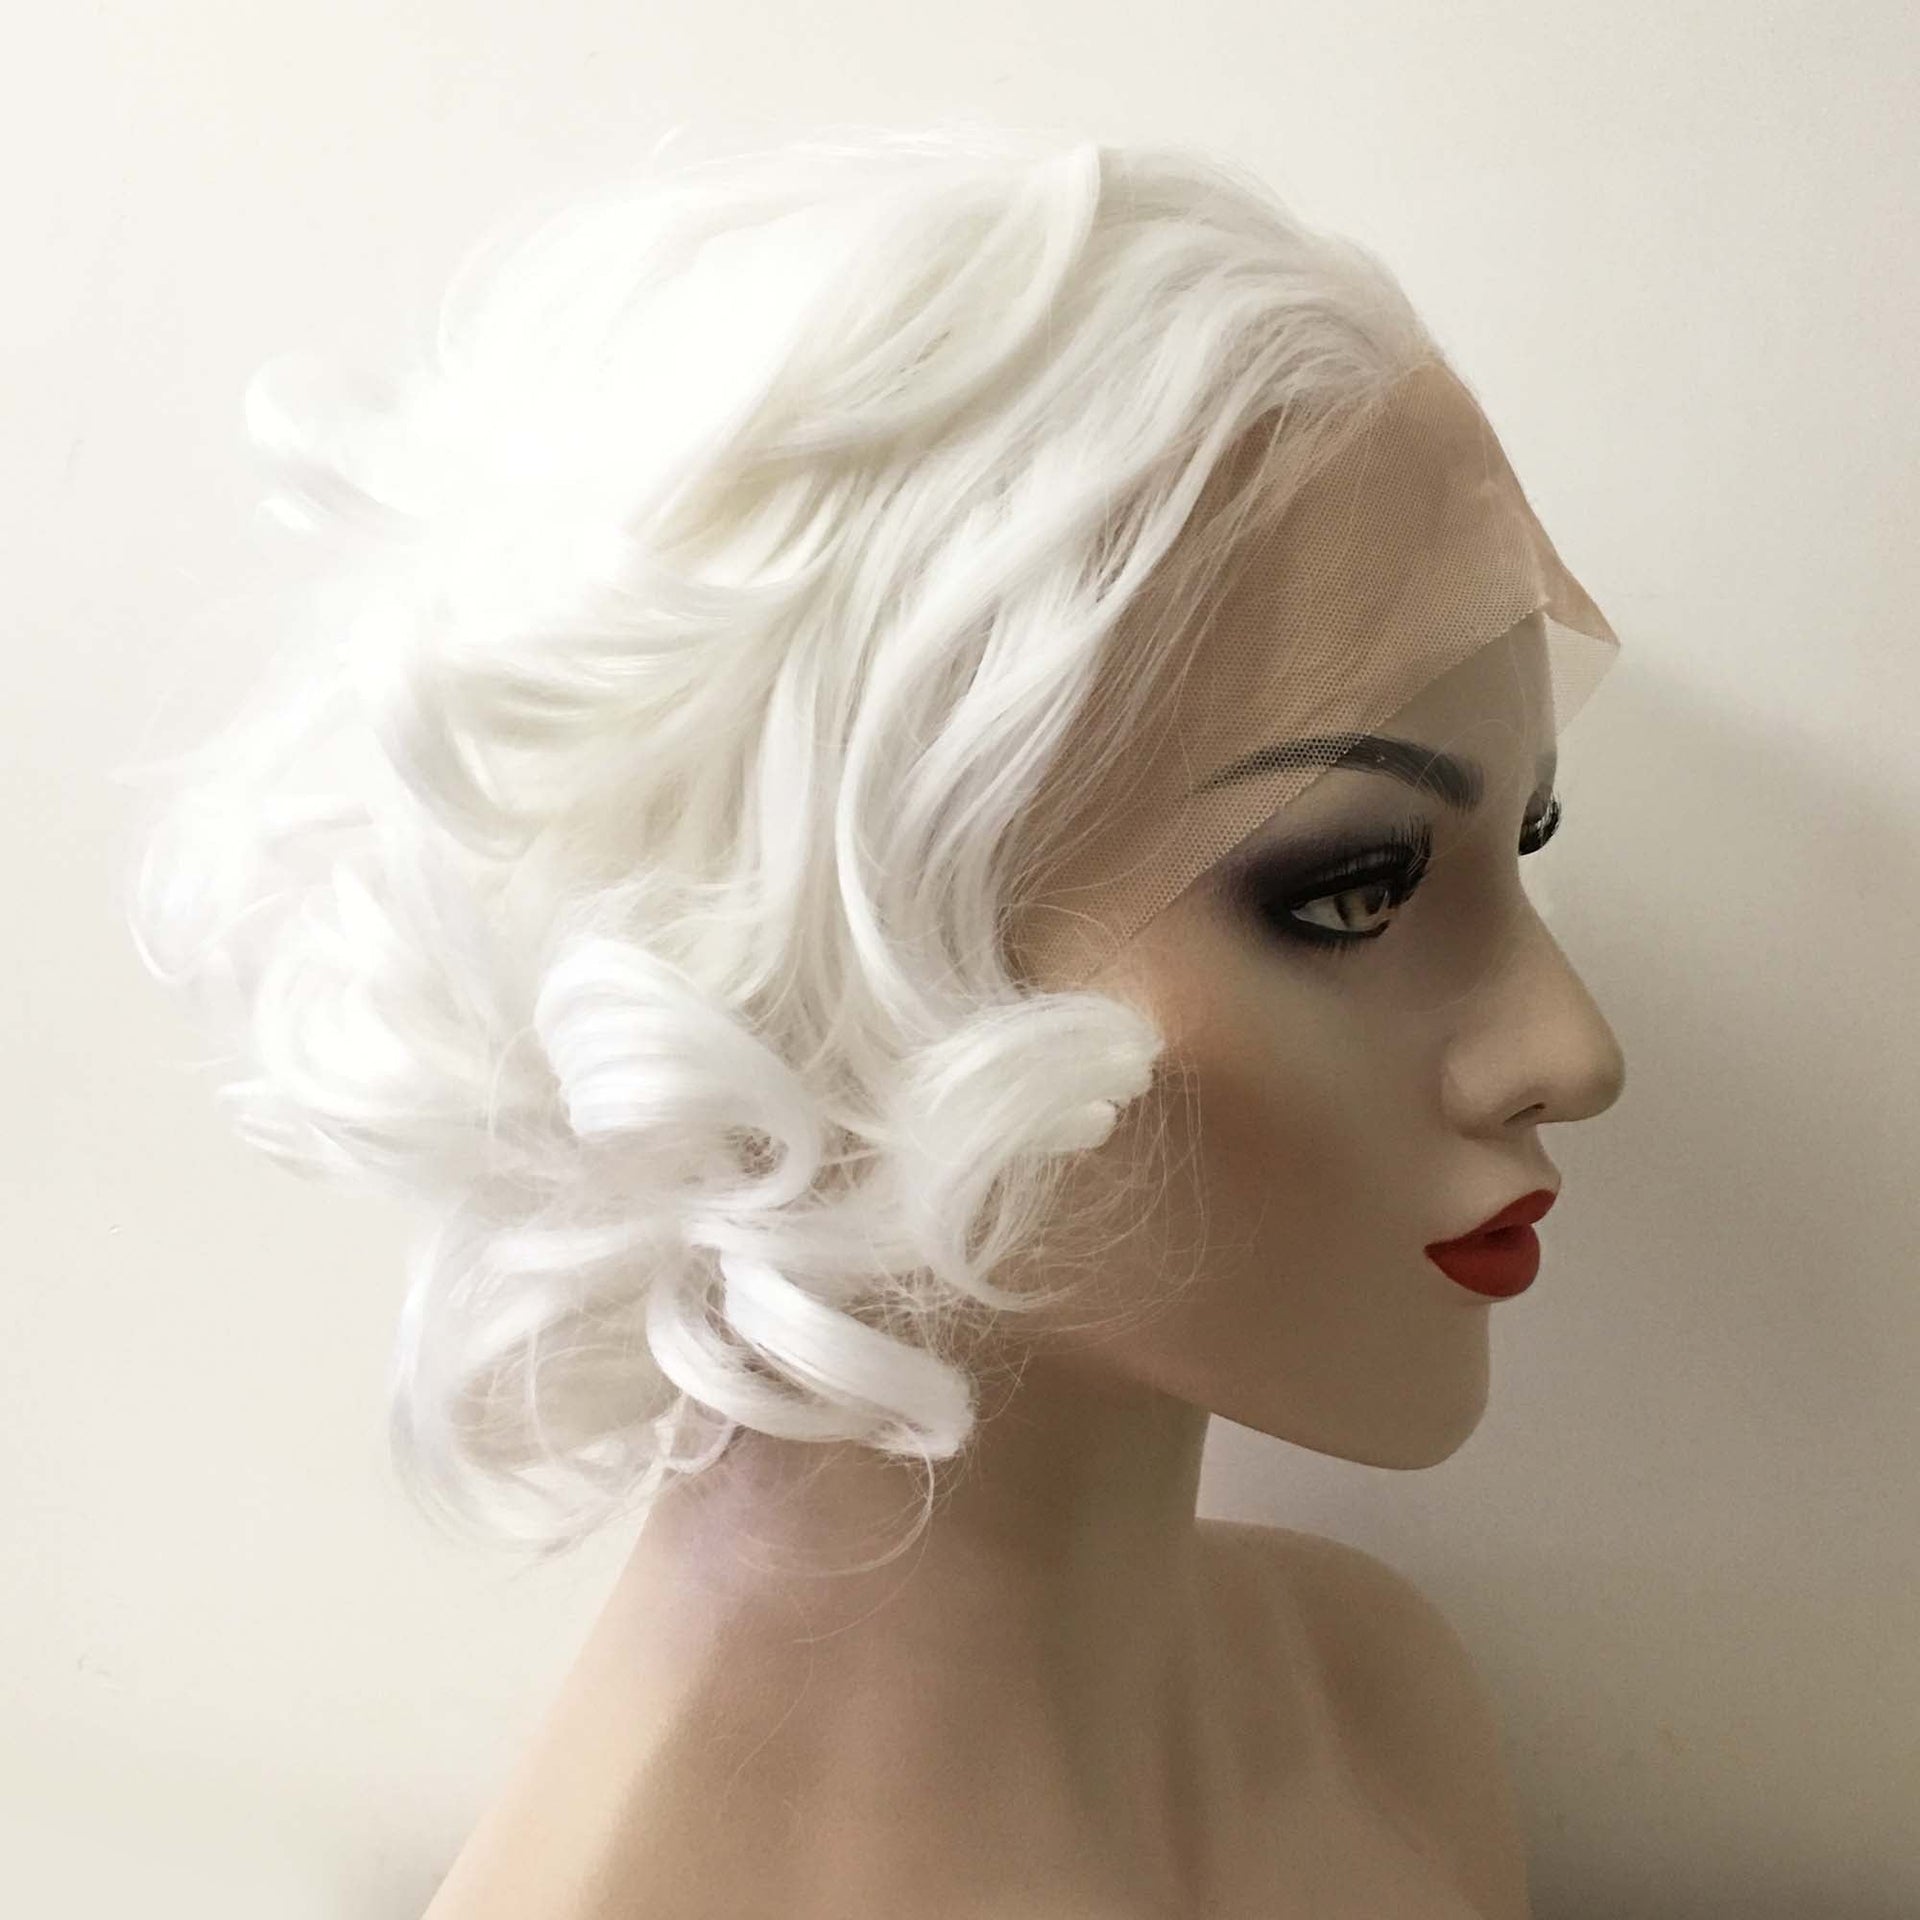 nevermindyrhead Women Snow White Lace Front Short Curly Vintage Style Slicked Back Wig